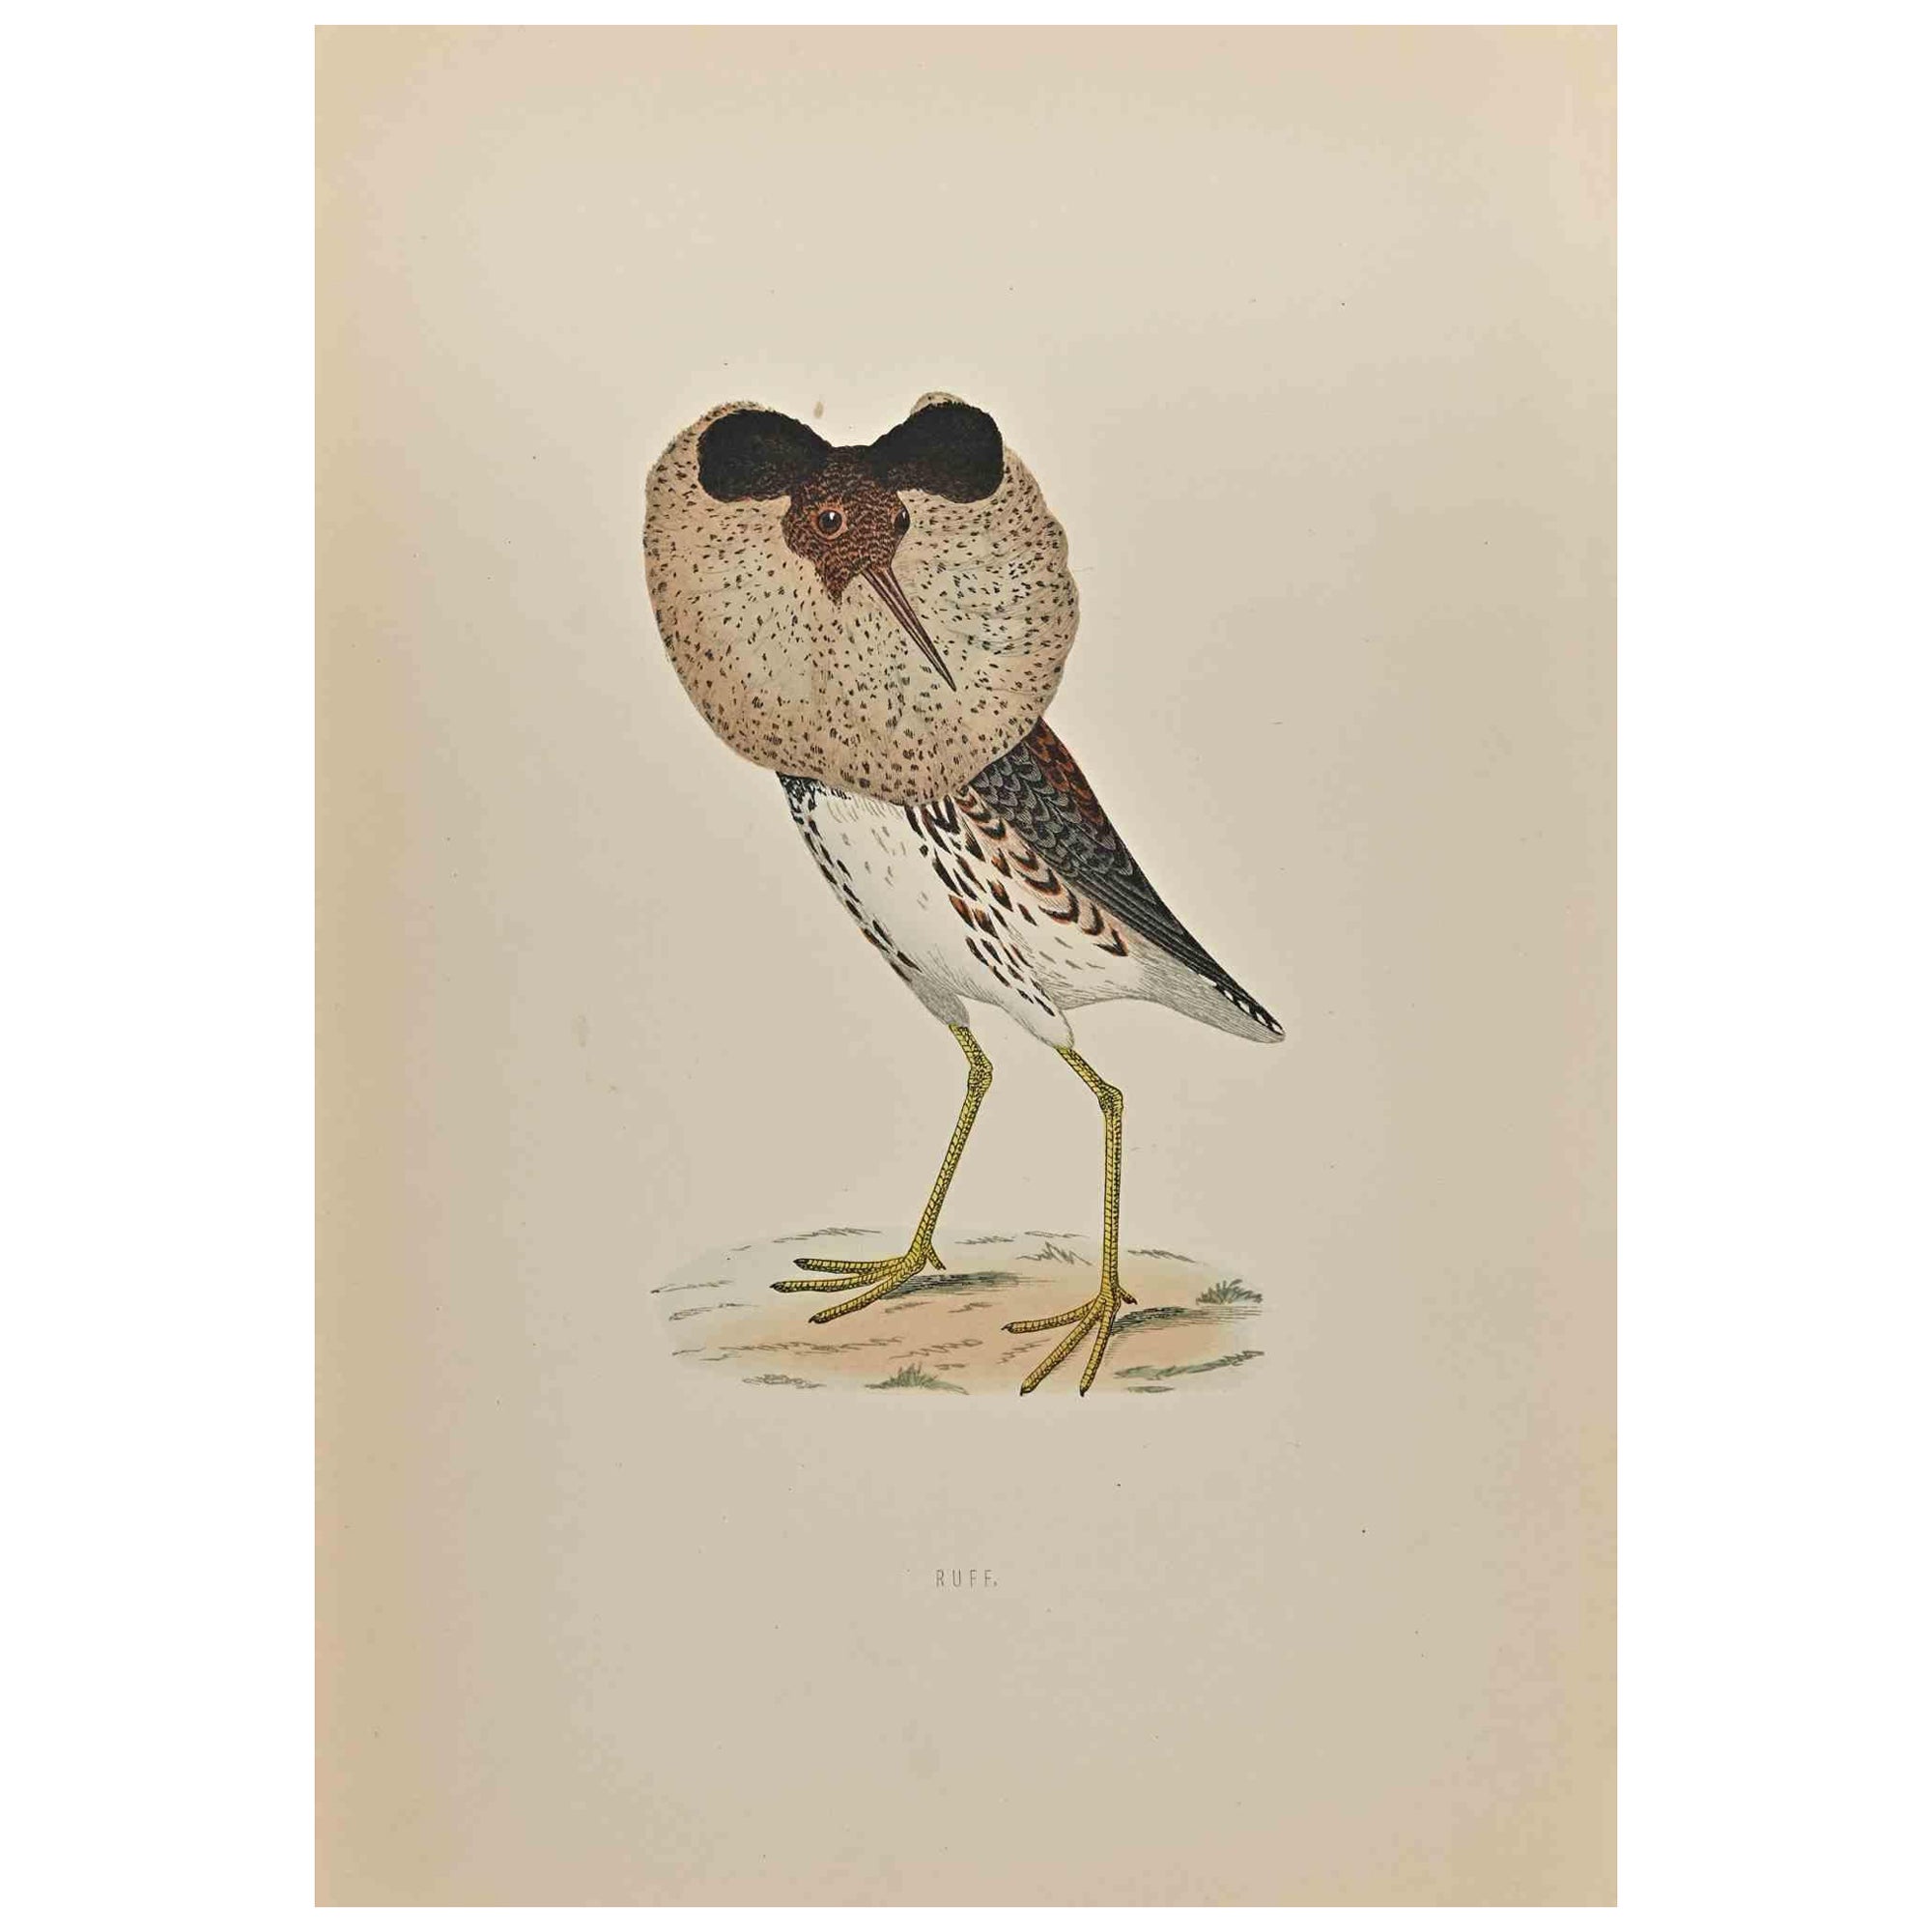  

Ruff is a modern artwork realized in 1870 by the British artist Alexander Francis Lydon (1836-1917).

Woodcut print on ivory-colored paper.

Hand-colored, published by London, Bell & Sons, 1870.  

 

The name of the bird is printed on the plate.